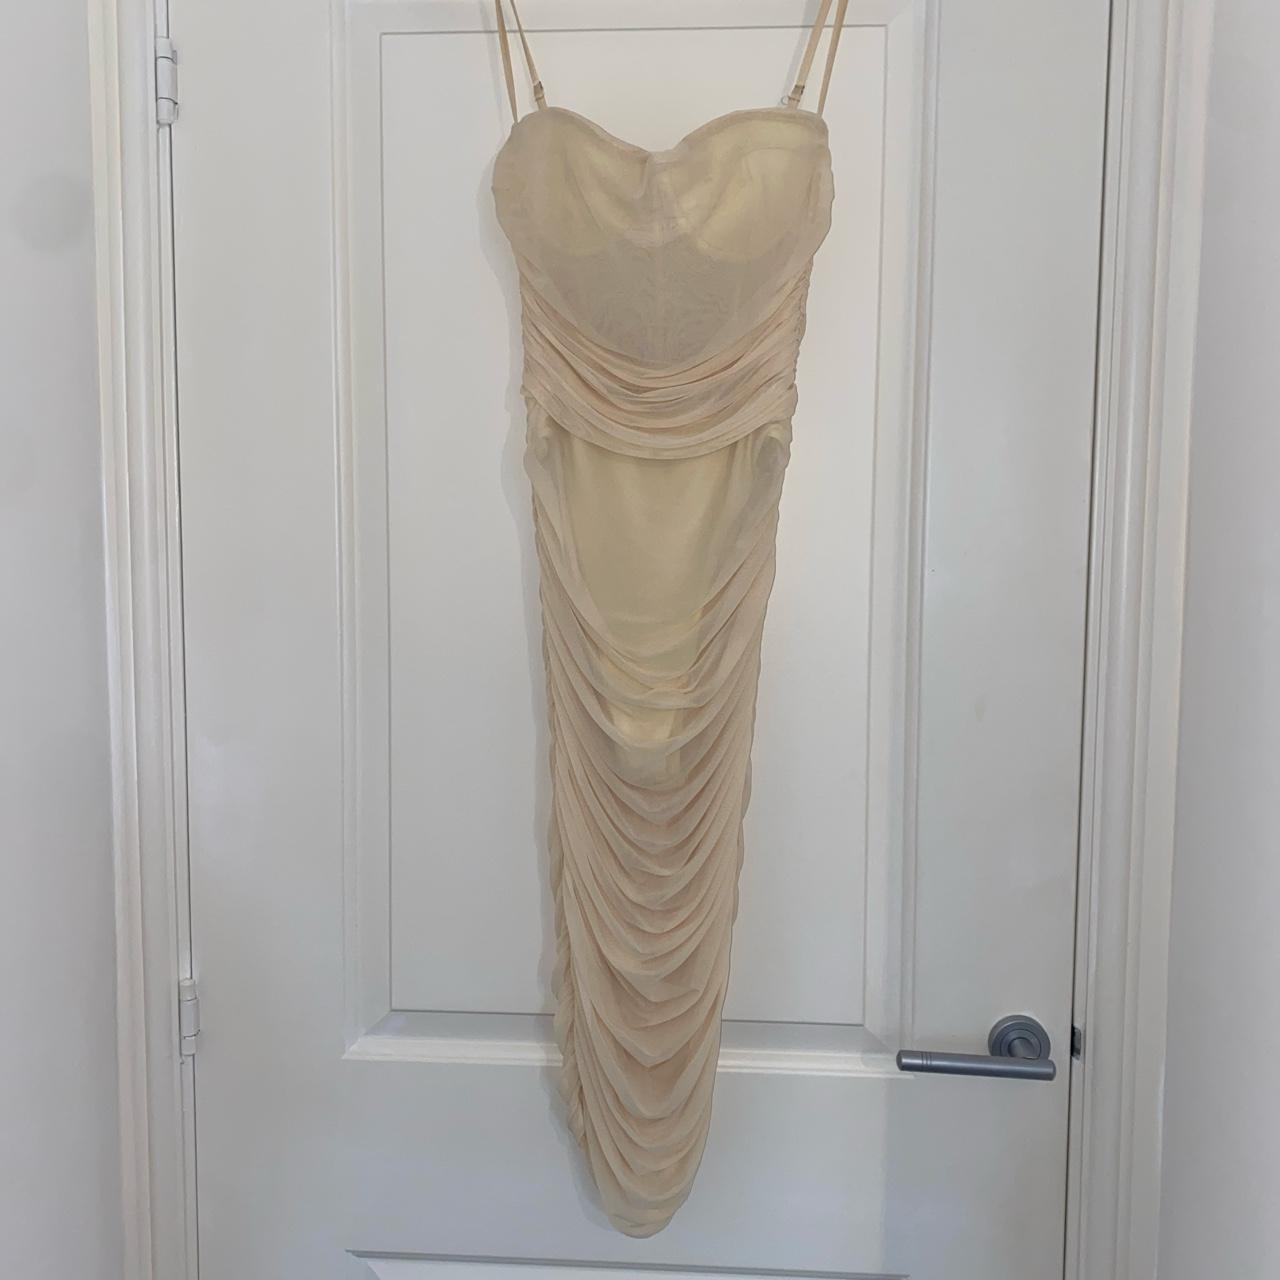 Oh polly size 8 cream sheer dress, worn twice don’t... Depop